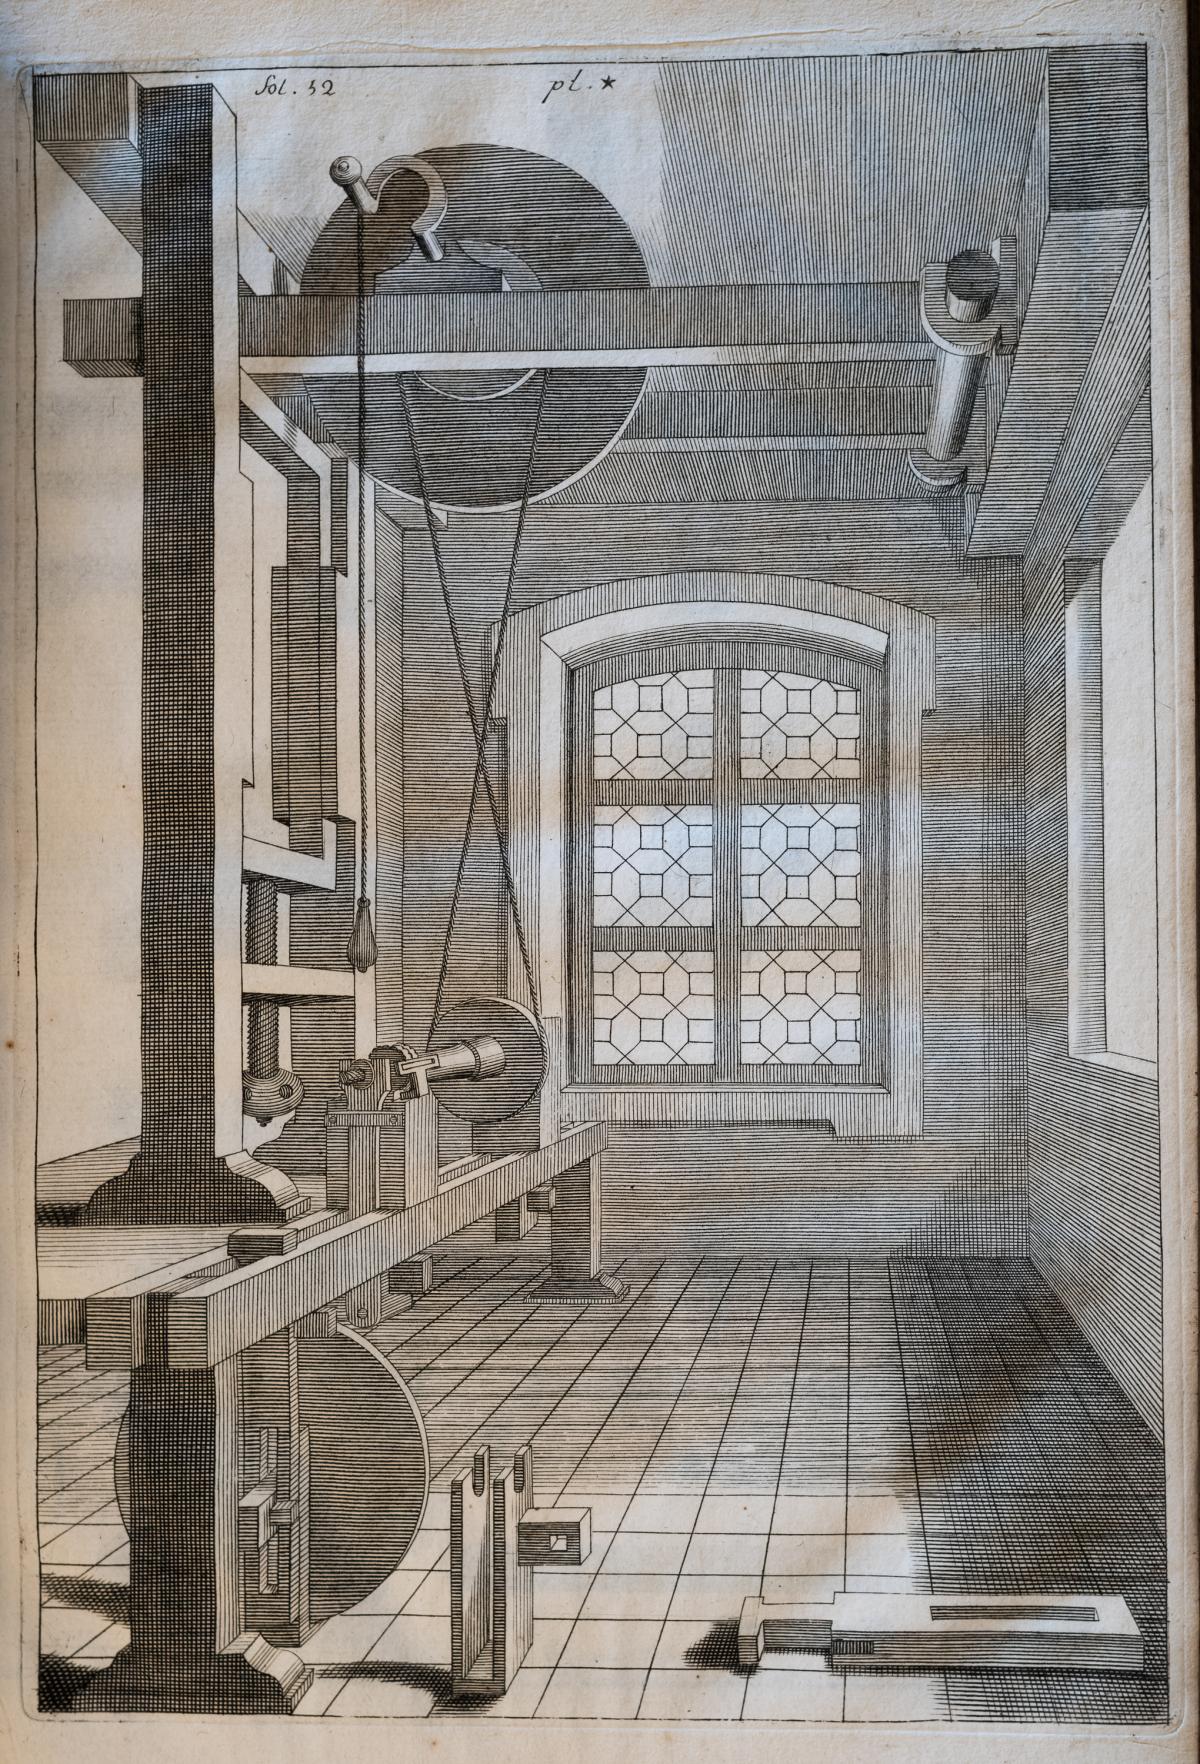 Treadle lathe with overhead flywheel mechanism. From “The Art of the Turner” 1701 by Charles Plumier